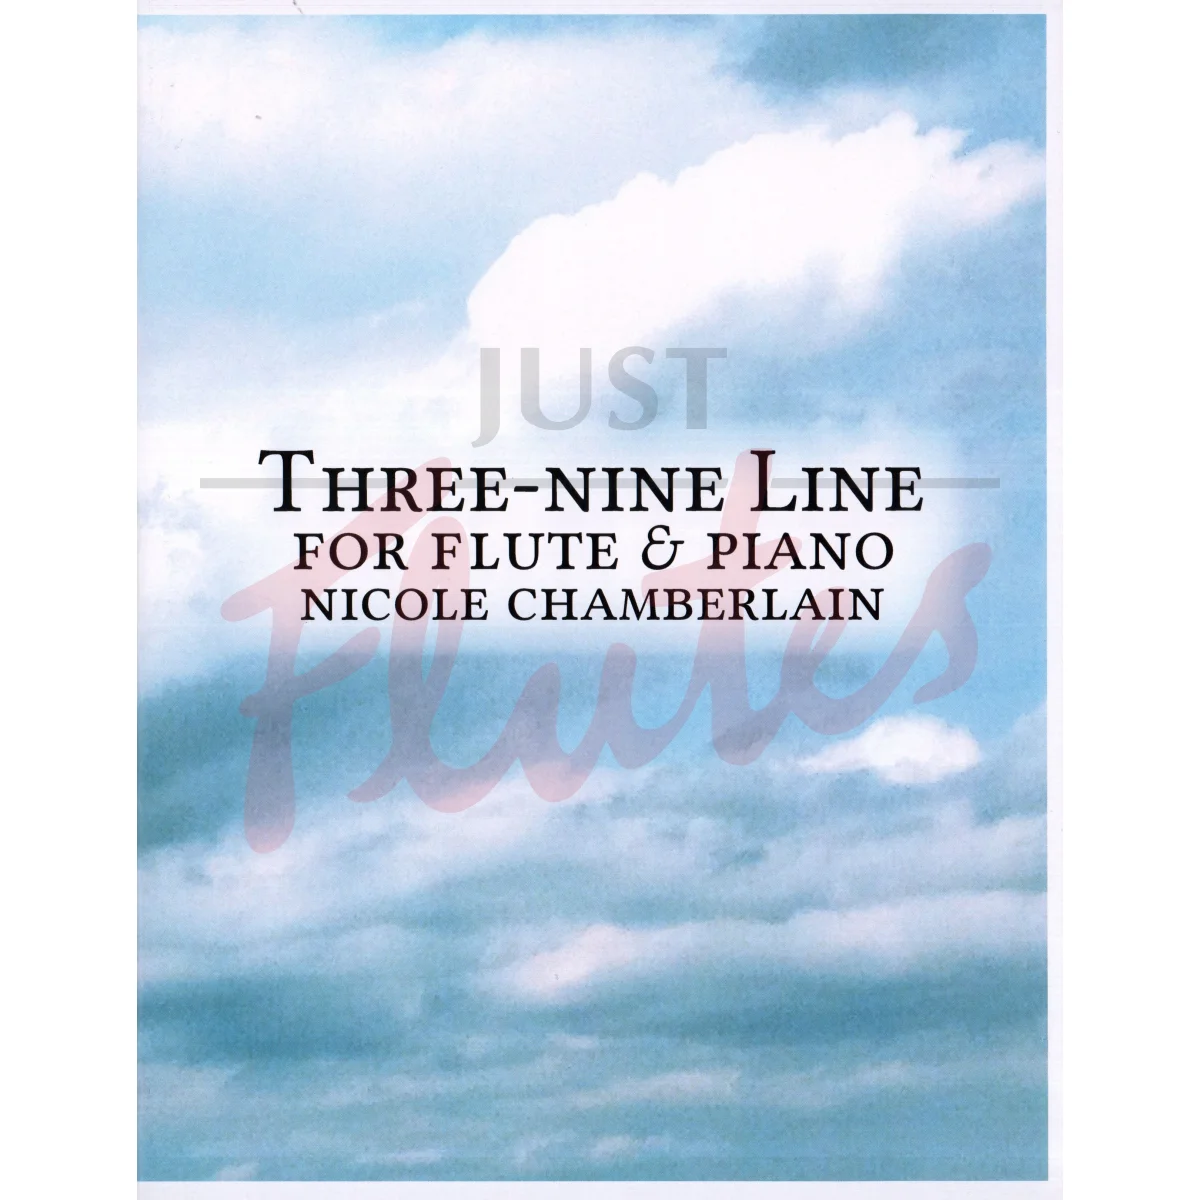 Three-Nine Line for Flute and Piano